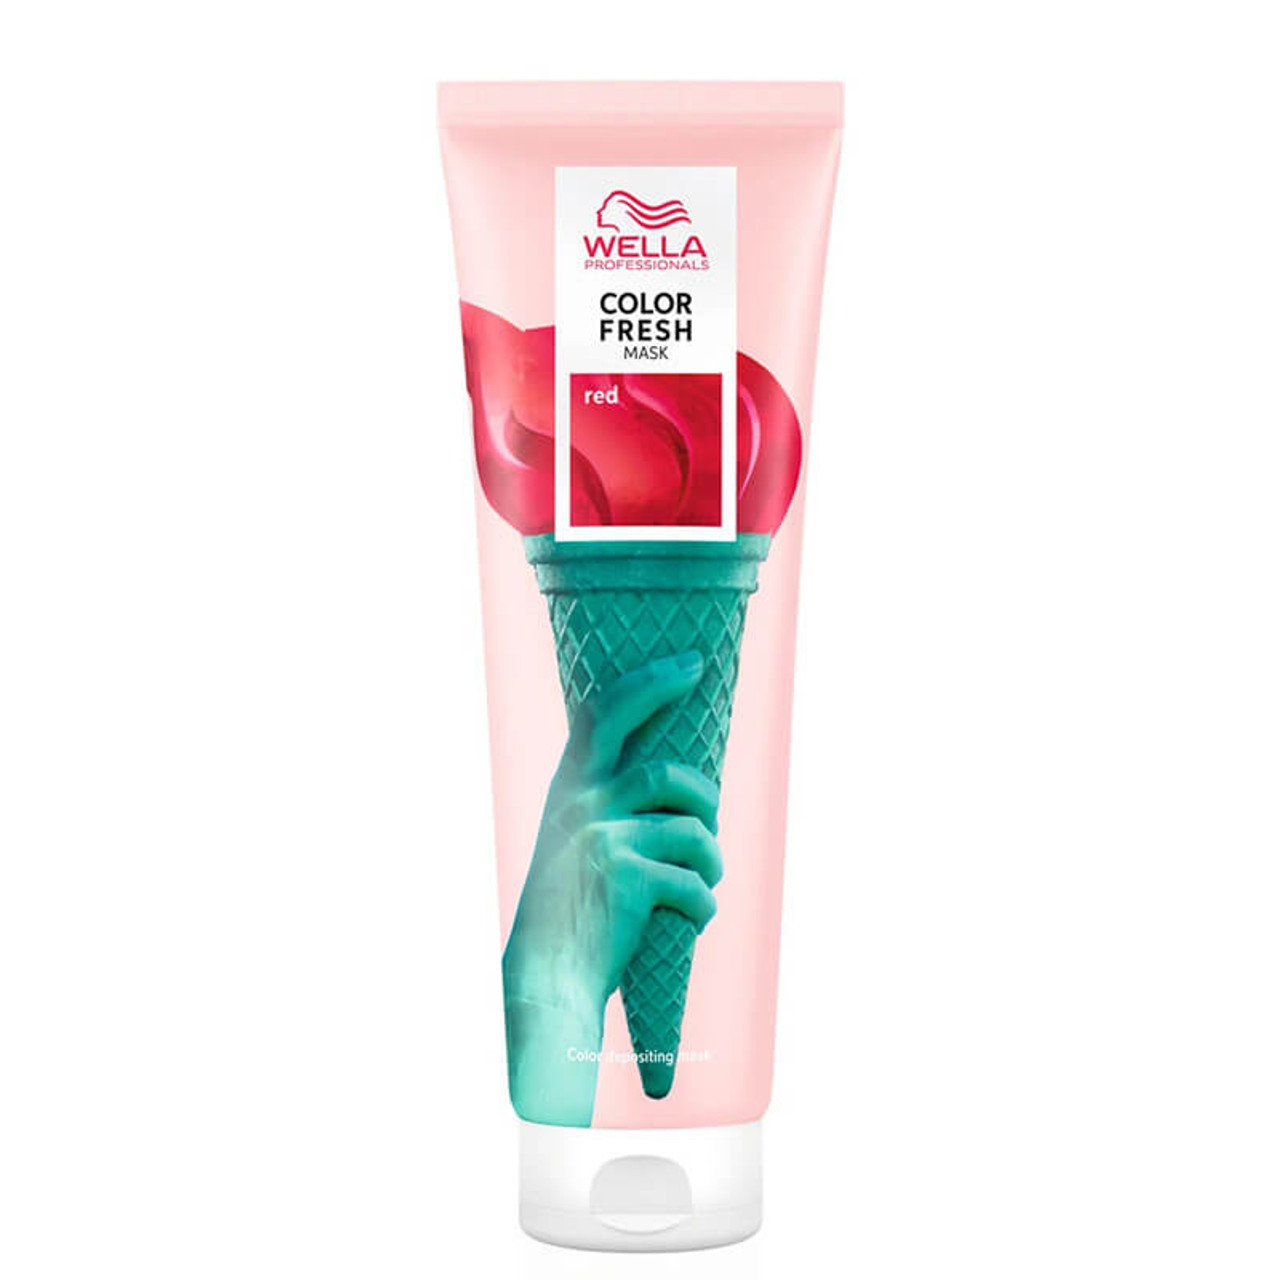 Wella Professional Color Fresh Mask Red 150ml